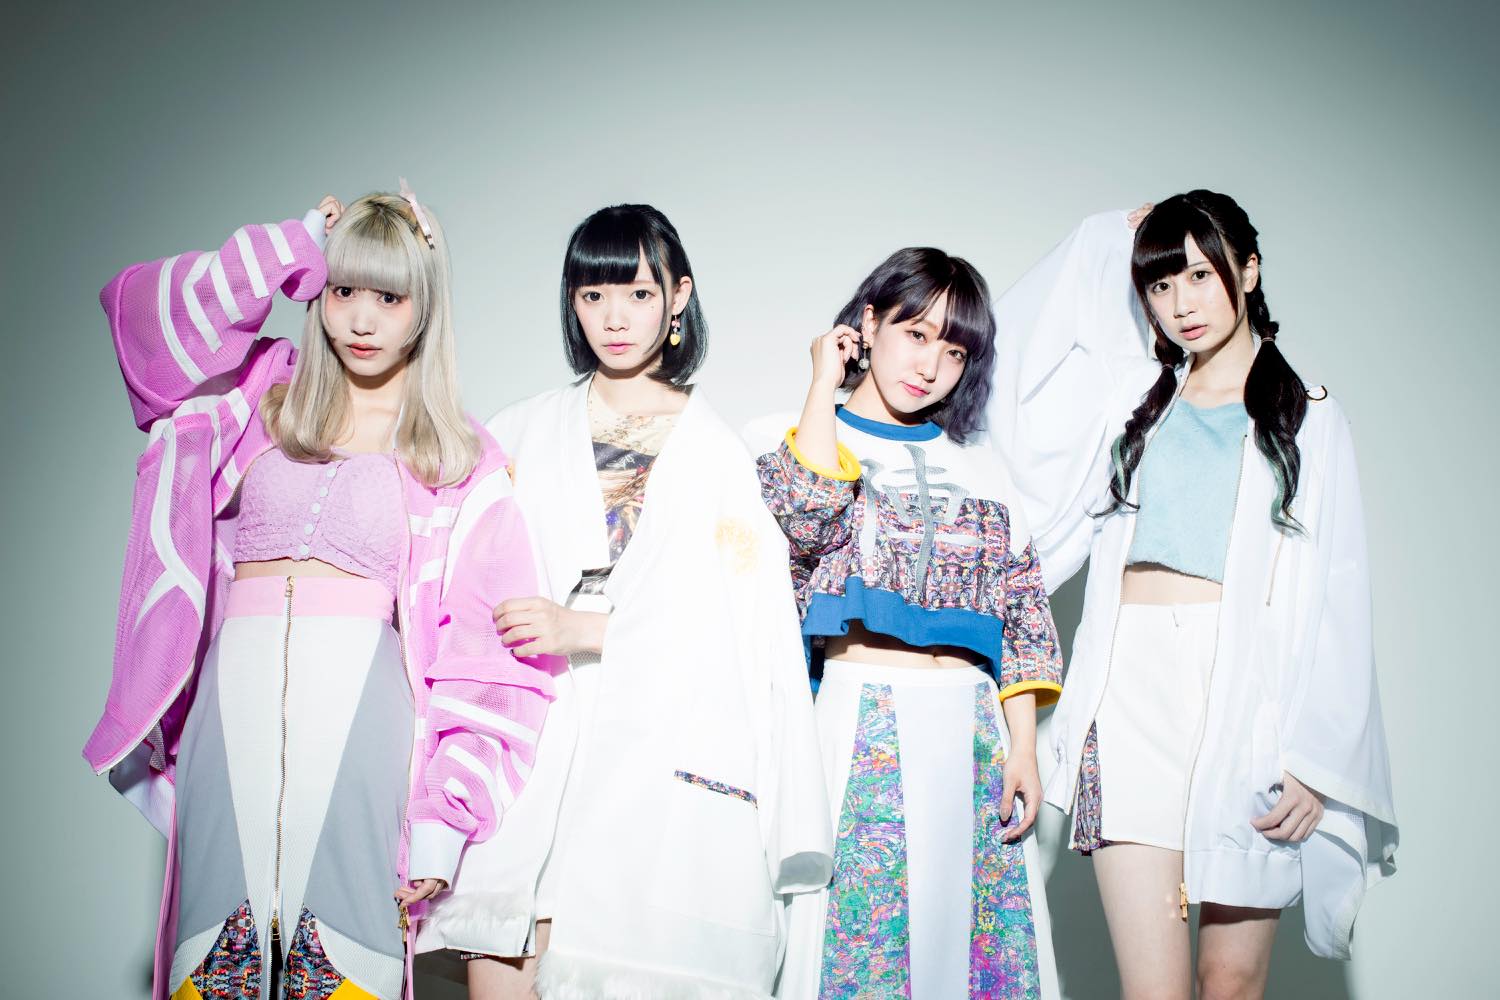 uijin to Release 1st Single and Hold 1st One-Man Live!